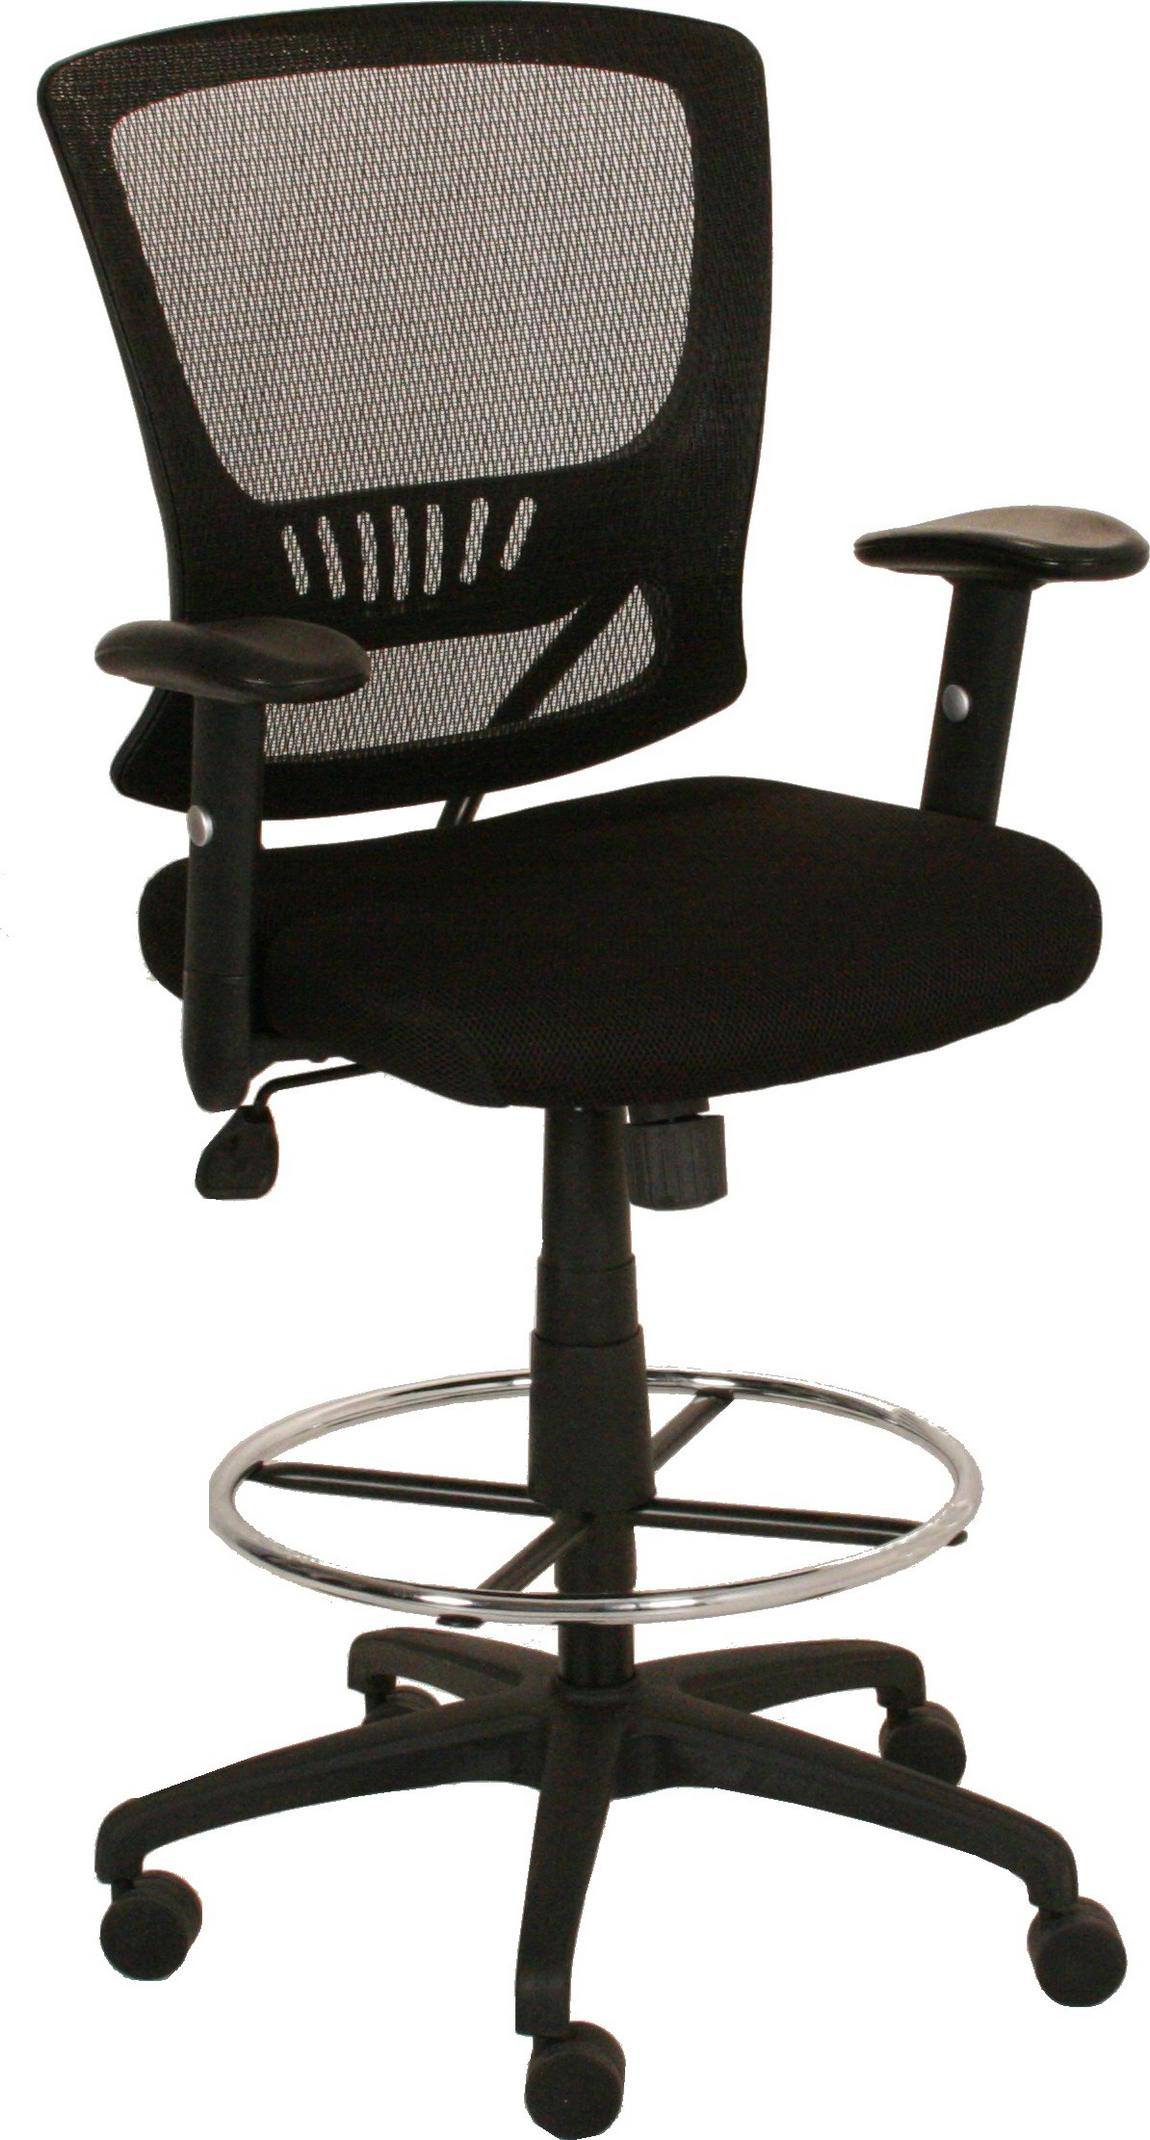 Black Stool Chair with Arms